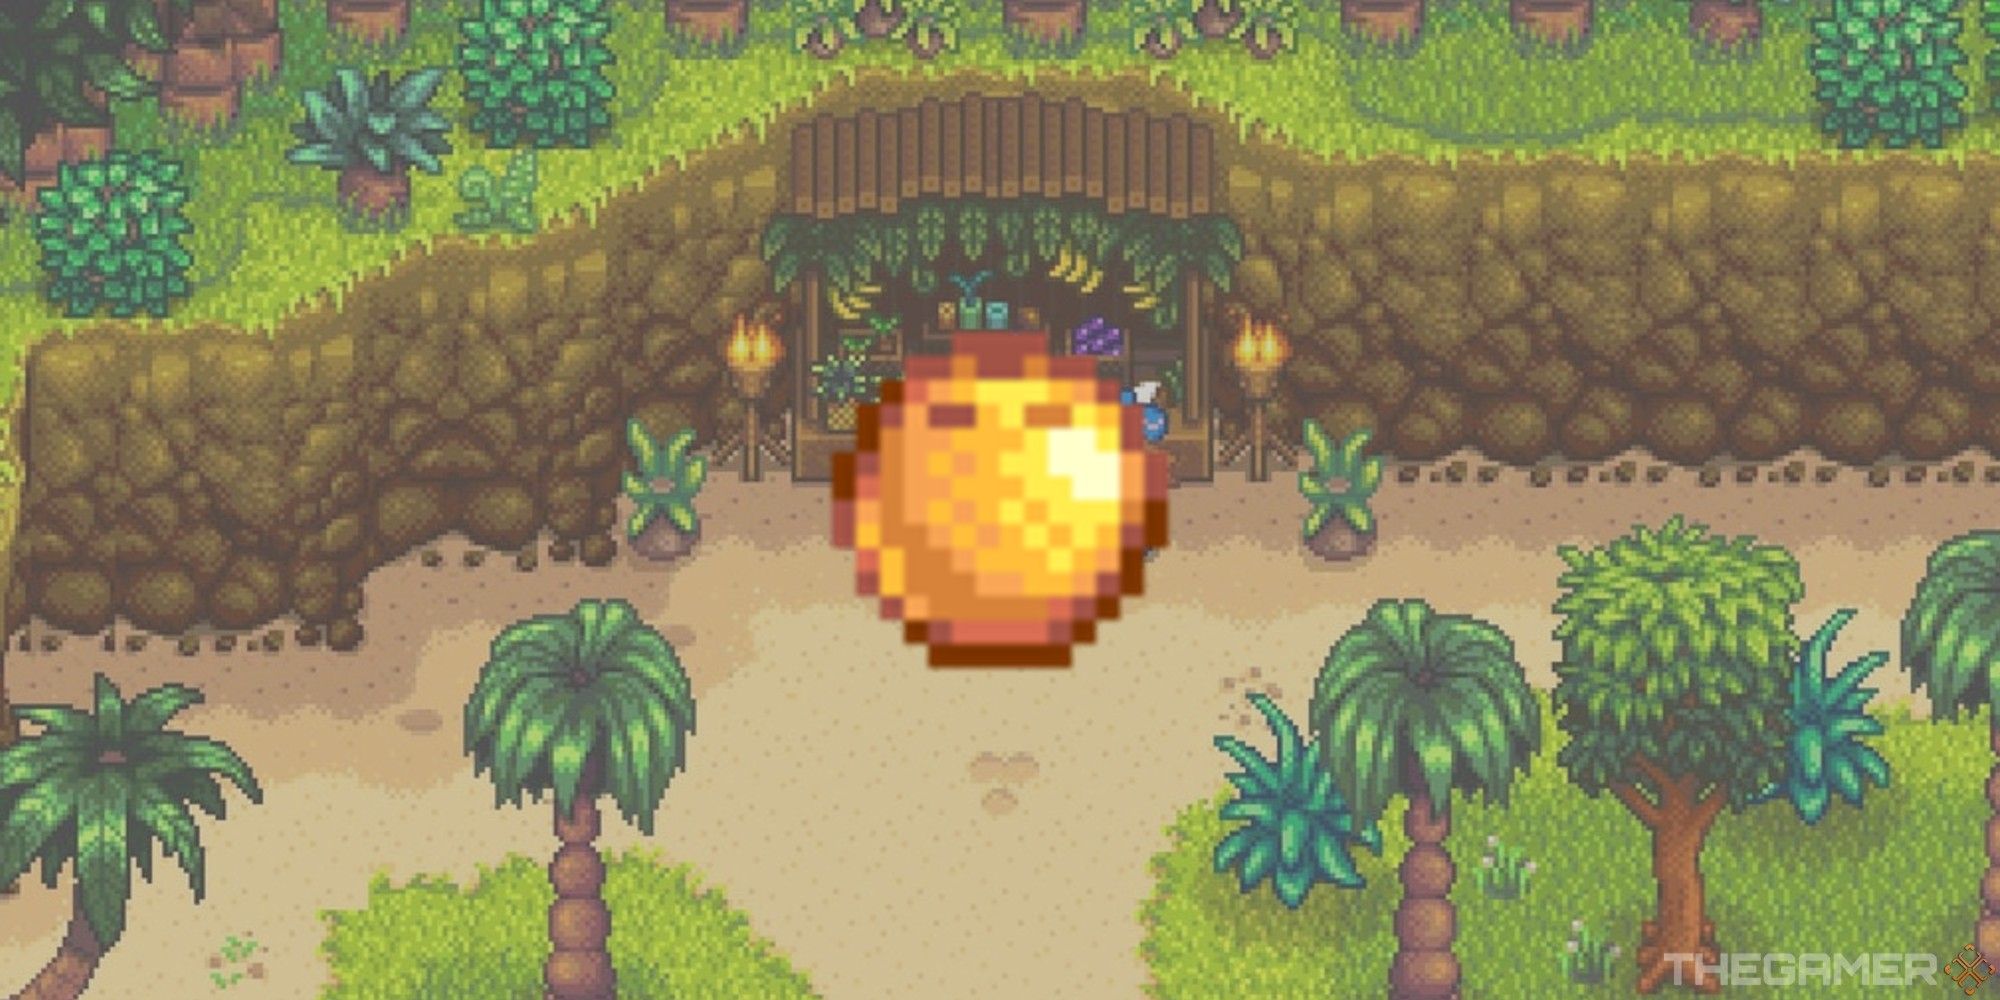 island trader location in stardew valley with golden coconut edited into image